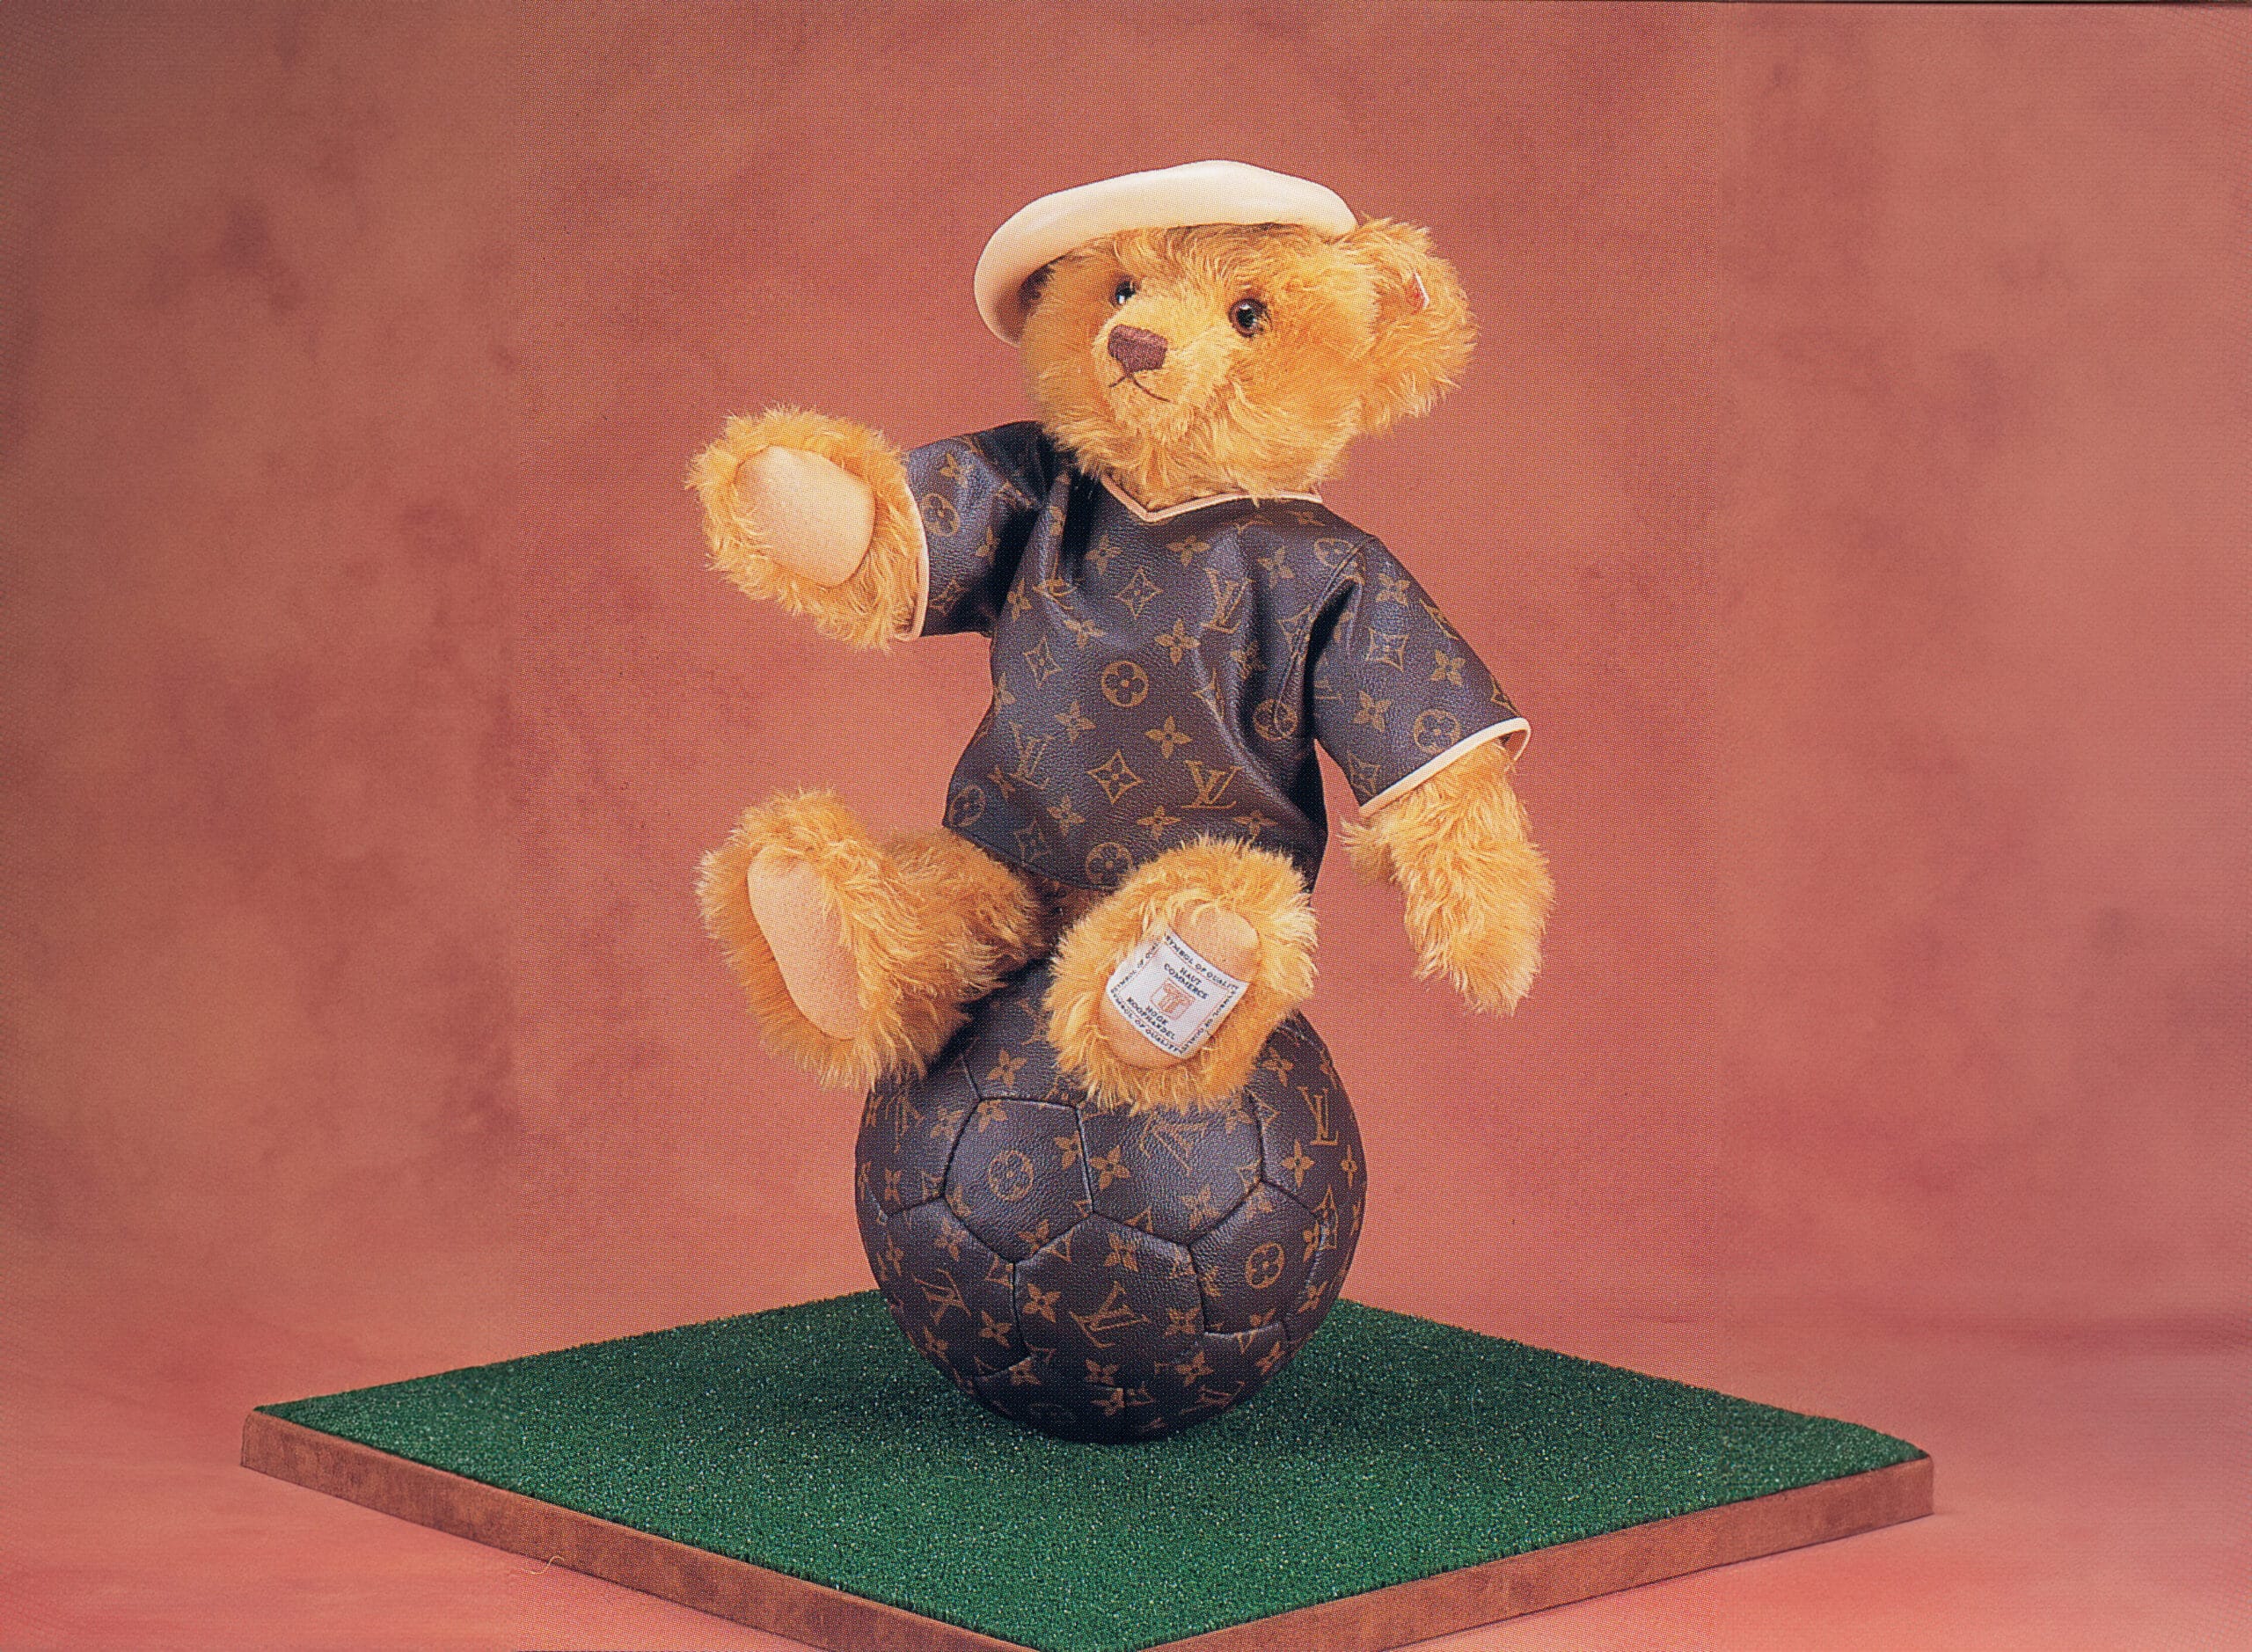 vuitton most expensive teddy